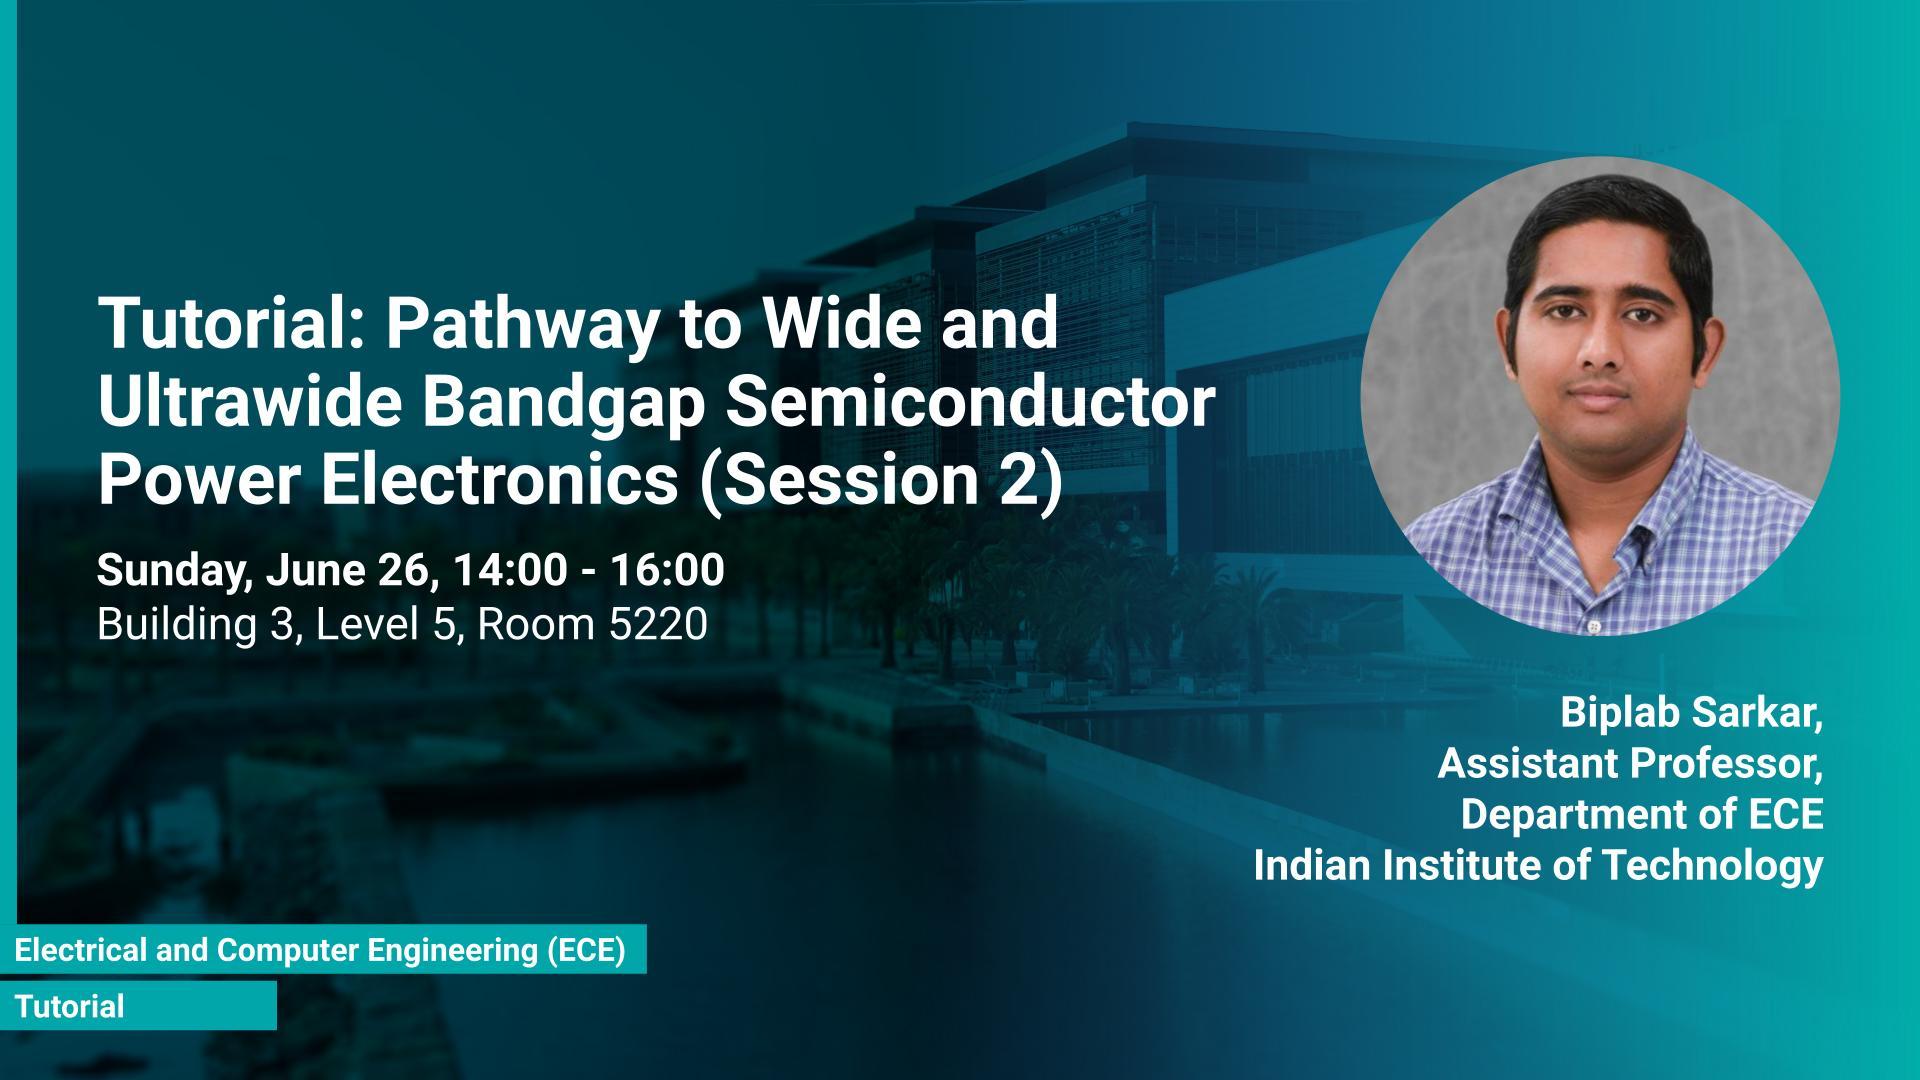 KAUST-CEMSE-ECE-Tutorial-Biplab-Sarkar-Pathway-to-Wide-and-Ultrawide-Bandgap-Semiconductor-Power-Electronics-2.jpg